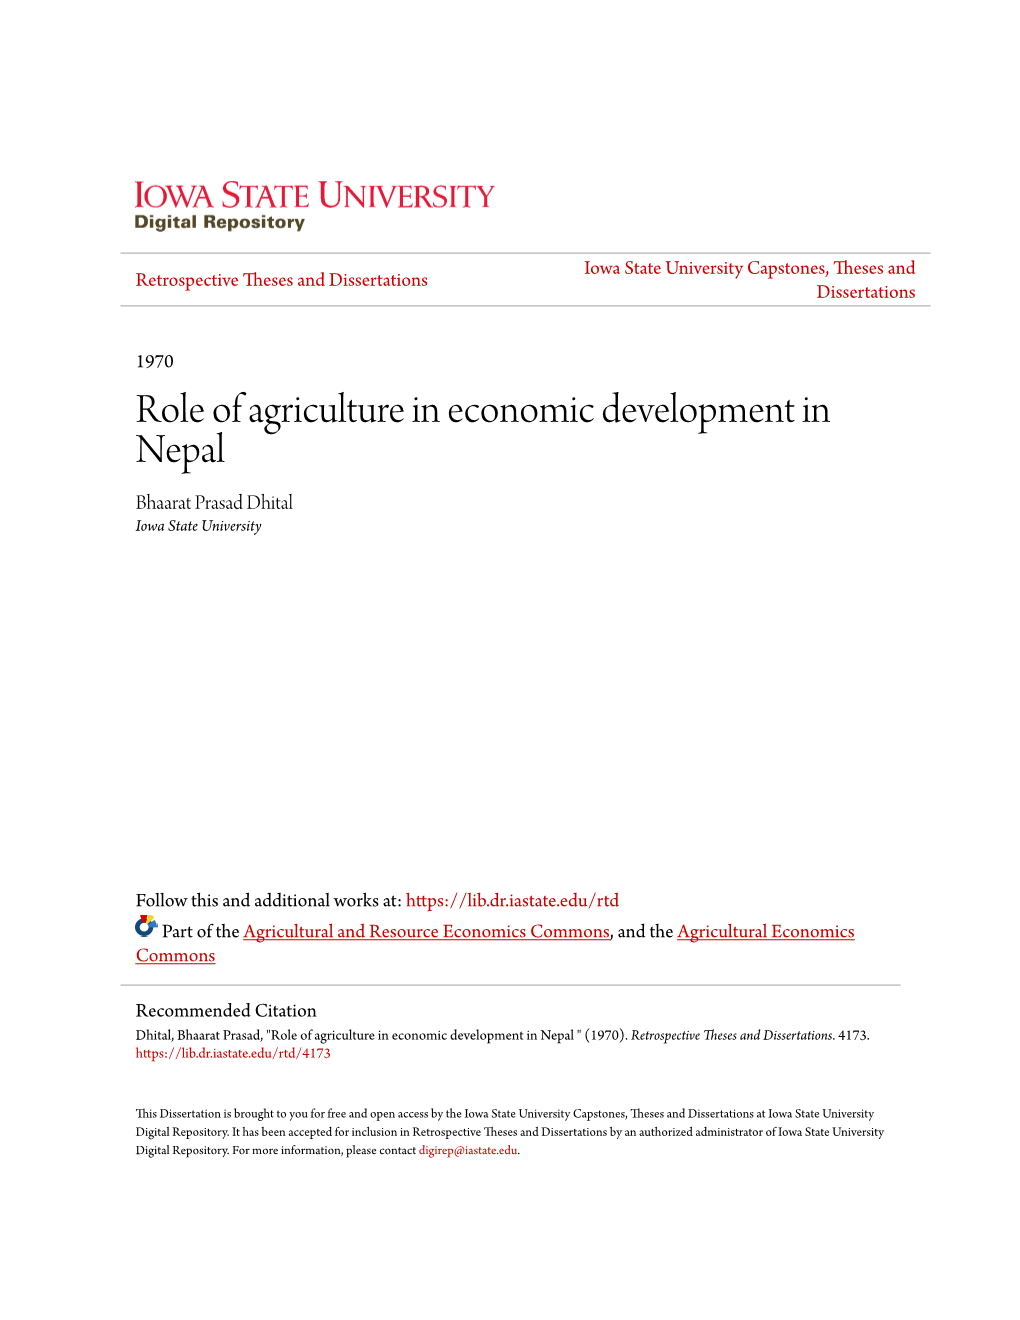 Role of Agriculture in Economic Development in Nepal Bhaarat Prasad Dhital Iowa State University